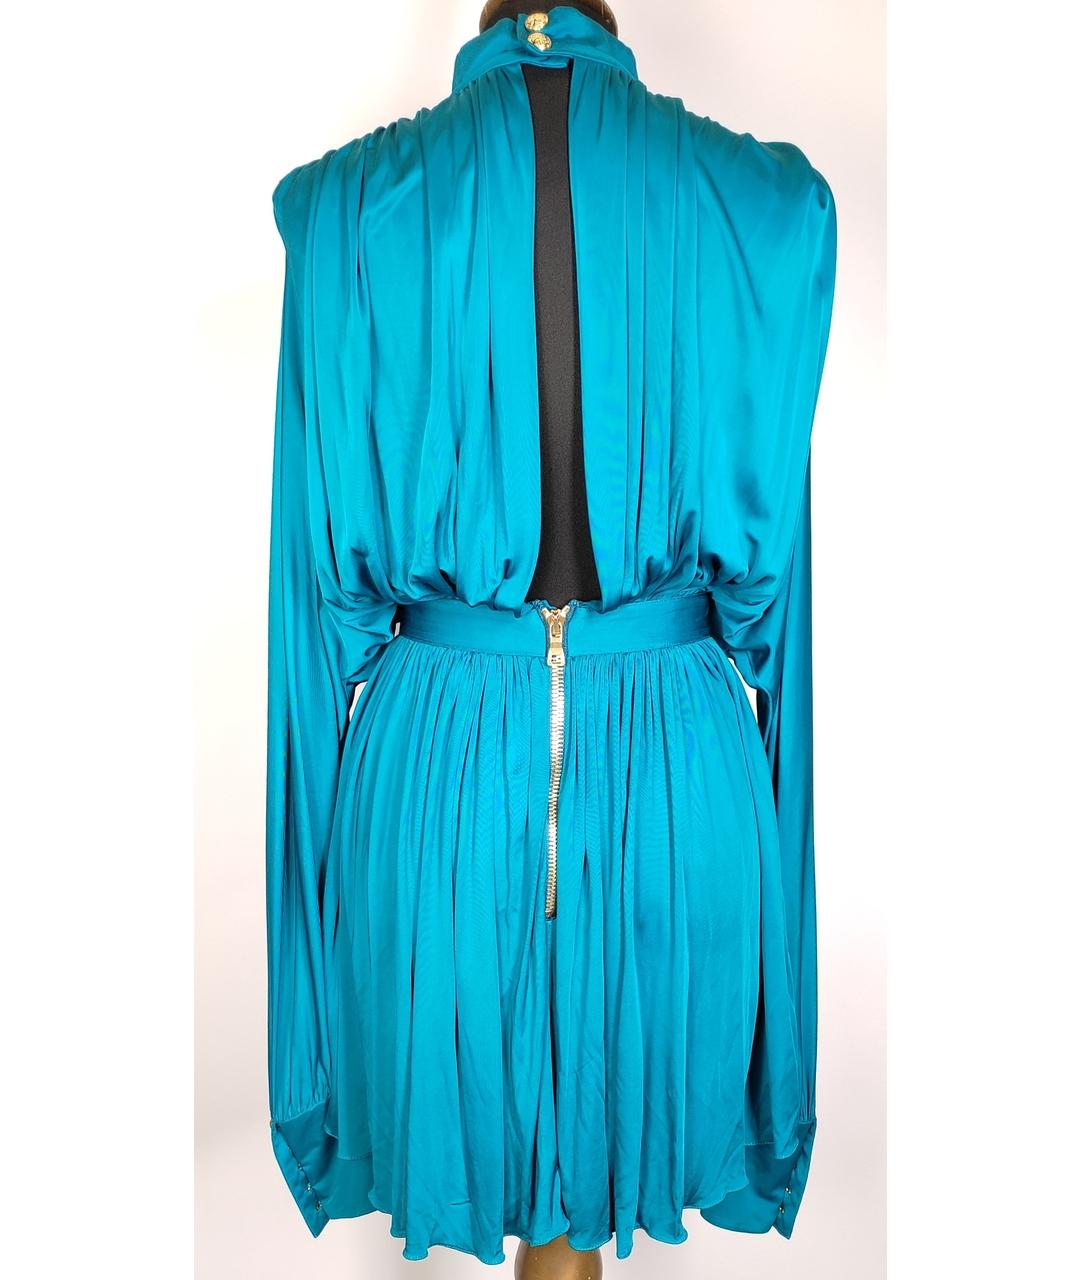  BALMAIN


Cocktail Blue short long sleeve dress

Turtleneck 

 Belted

Open Back

Back Zipper


Size 38 or US 6



Pre-owned. Perfect condition

 100% authentic guarantee 

       PLEASE VISIT OUR STORE FOR MORE GREAT ITEMS 
os